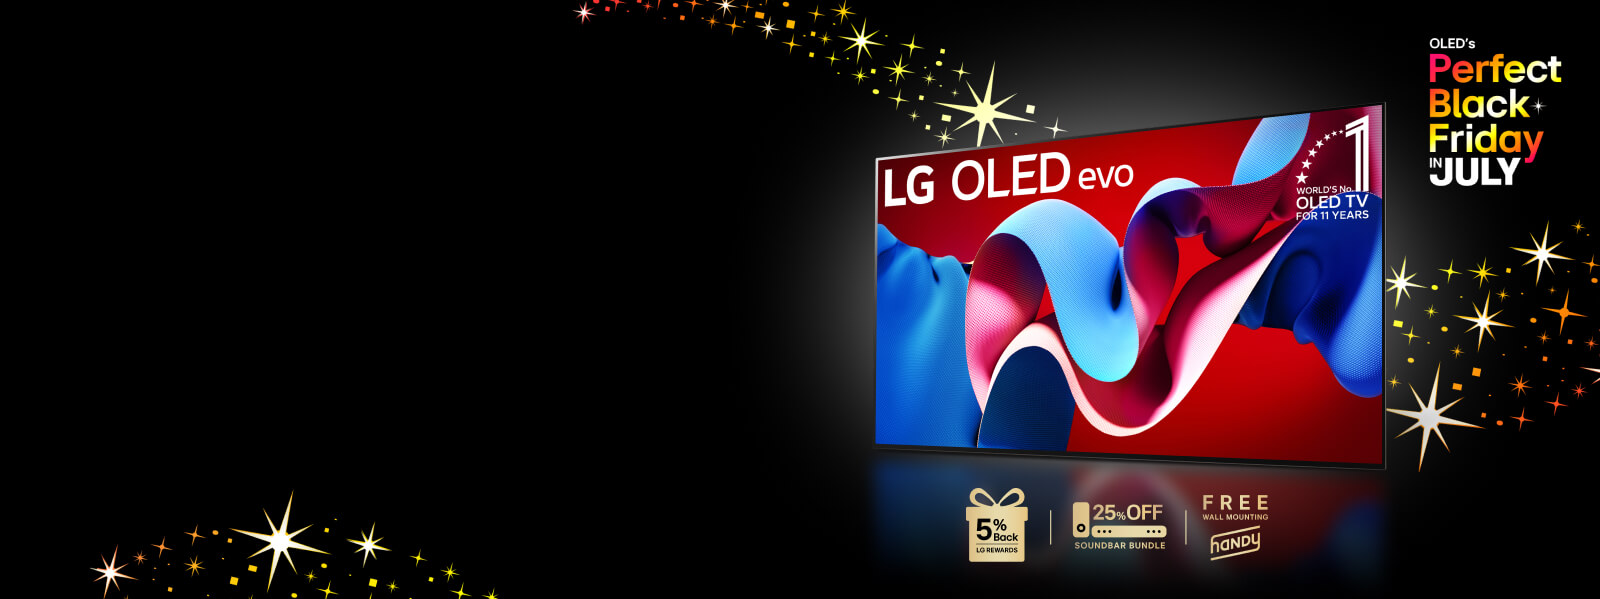 Celebrate OLEDs perfect black with up to 45 percent off image for desktop